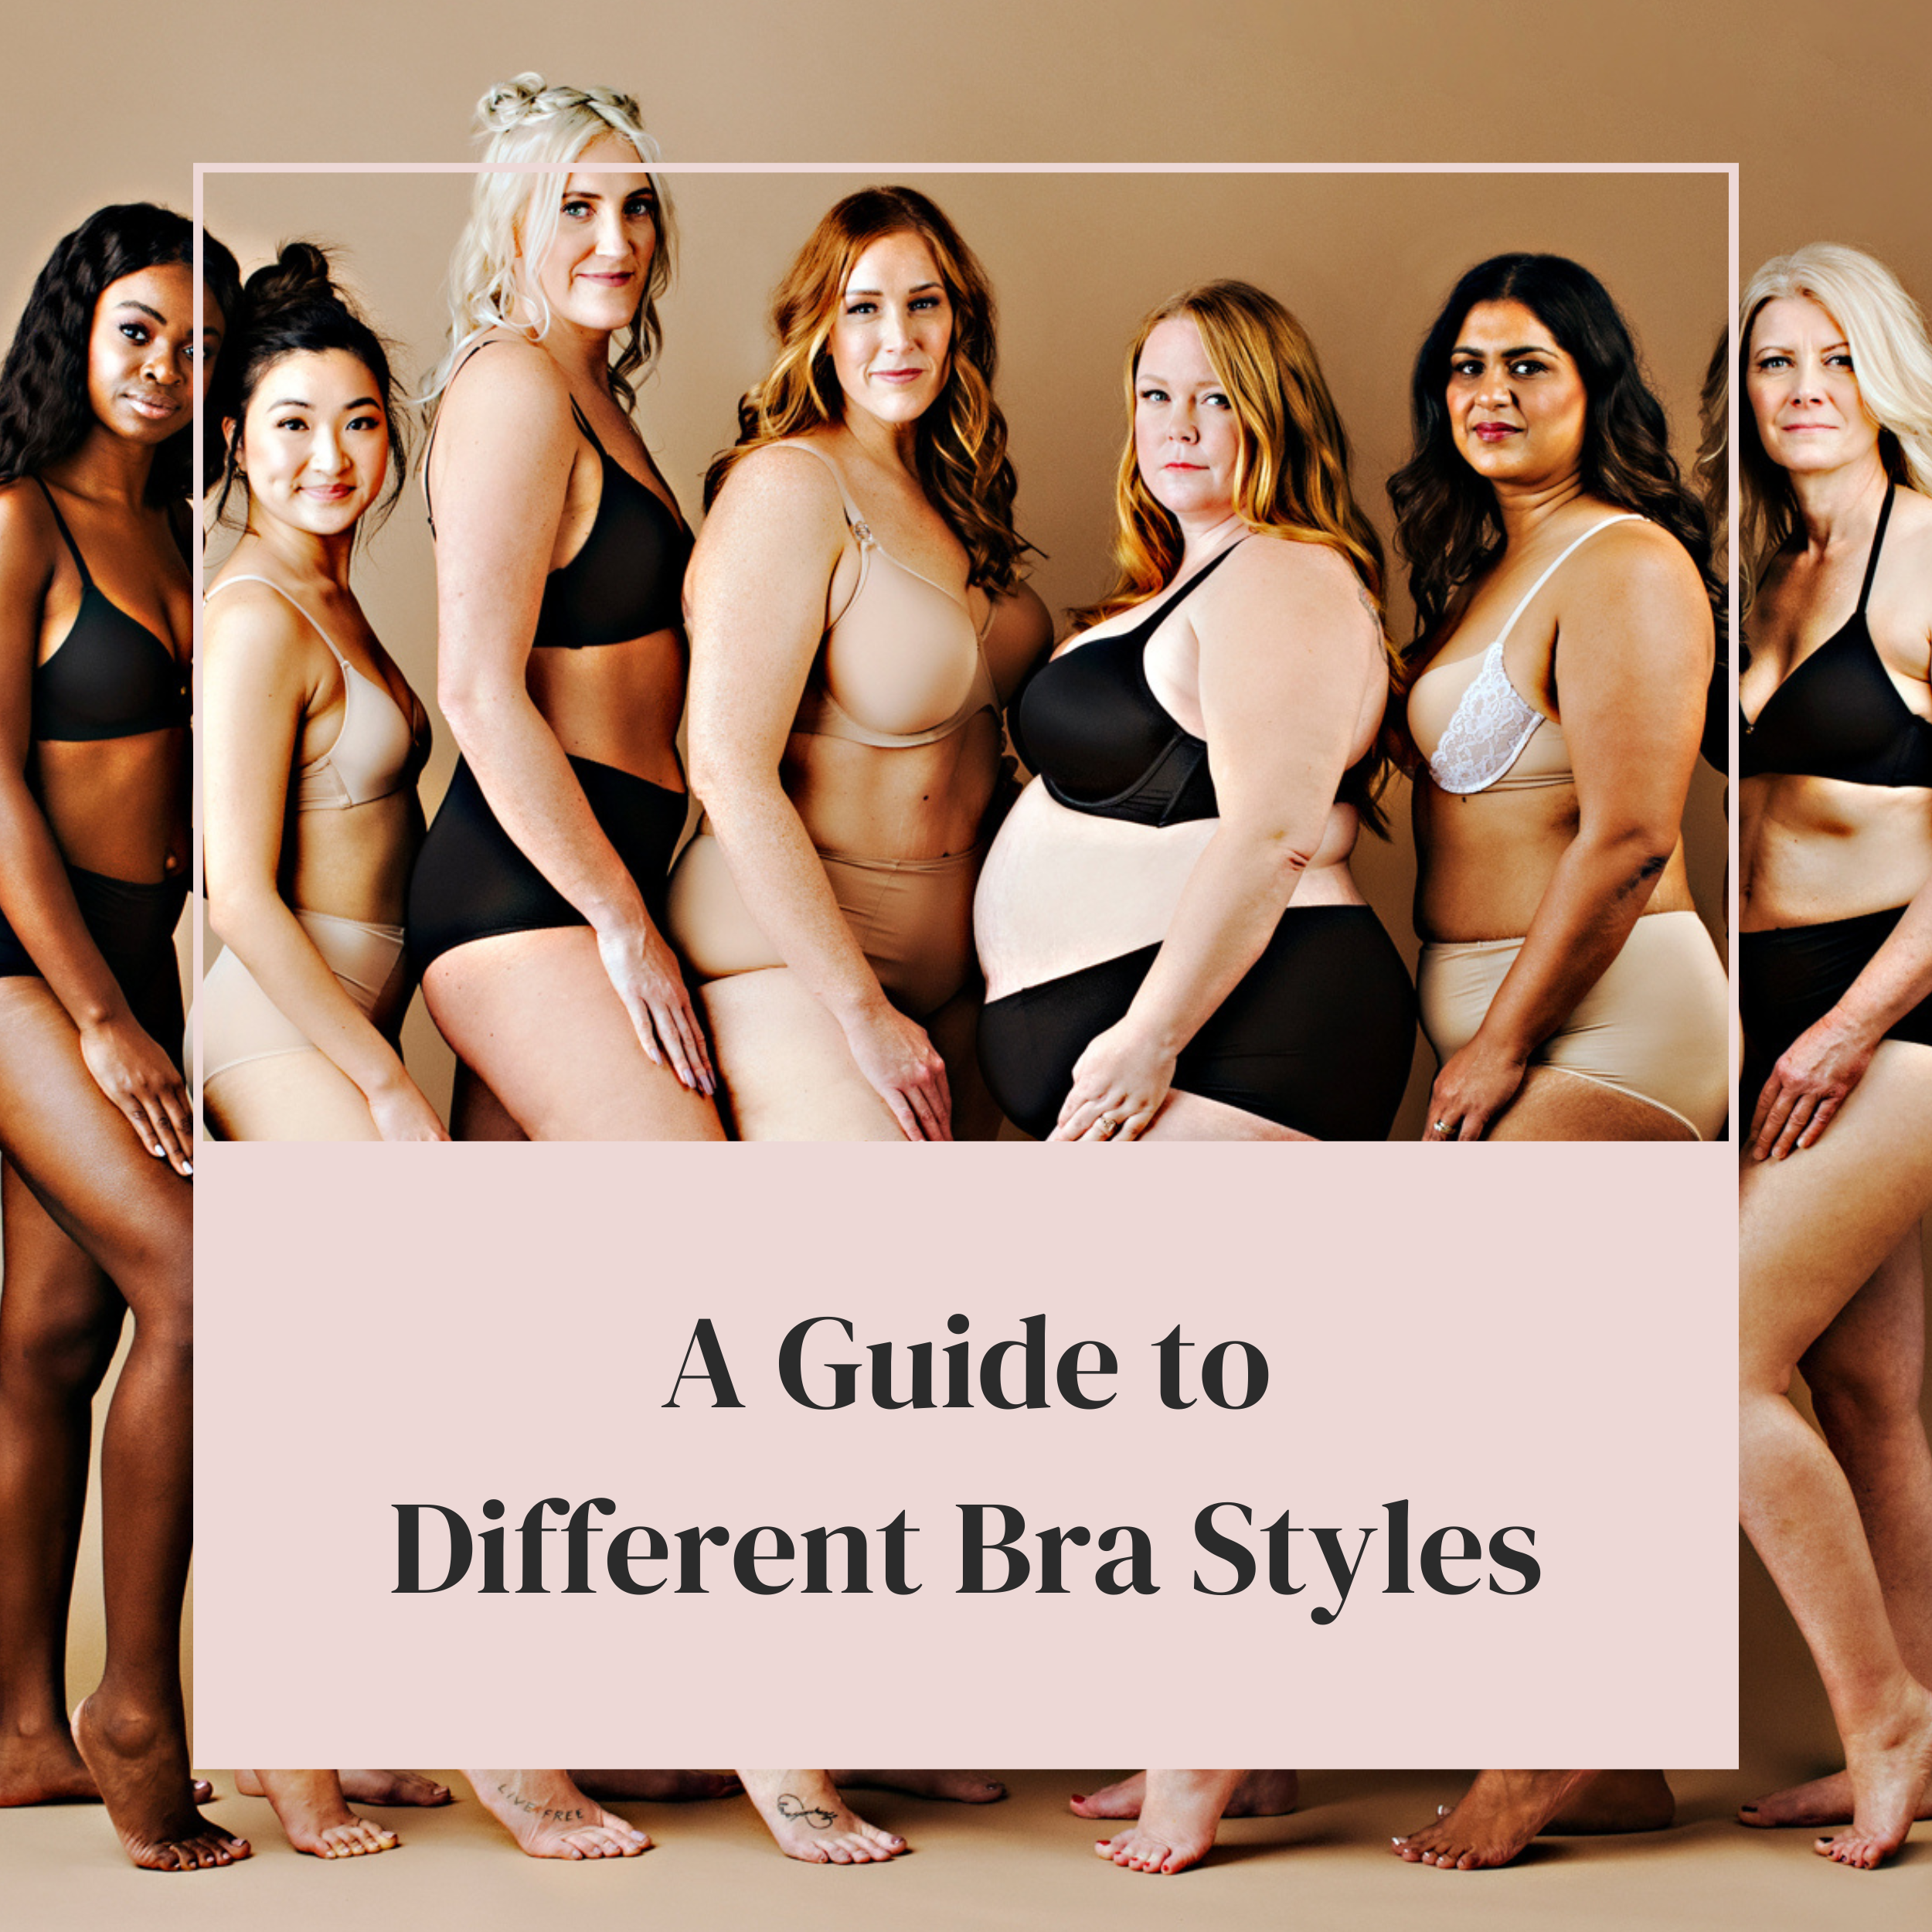 Guide to Different Bra Styles - Find Your Perfect Fit